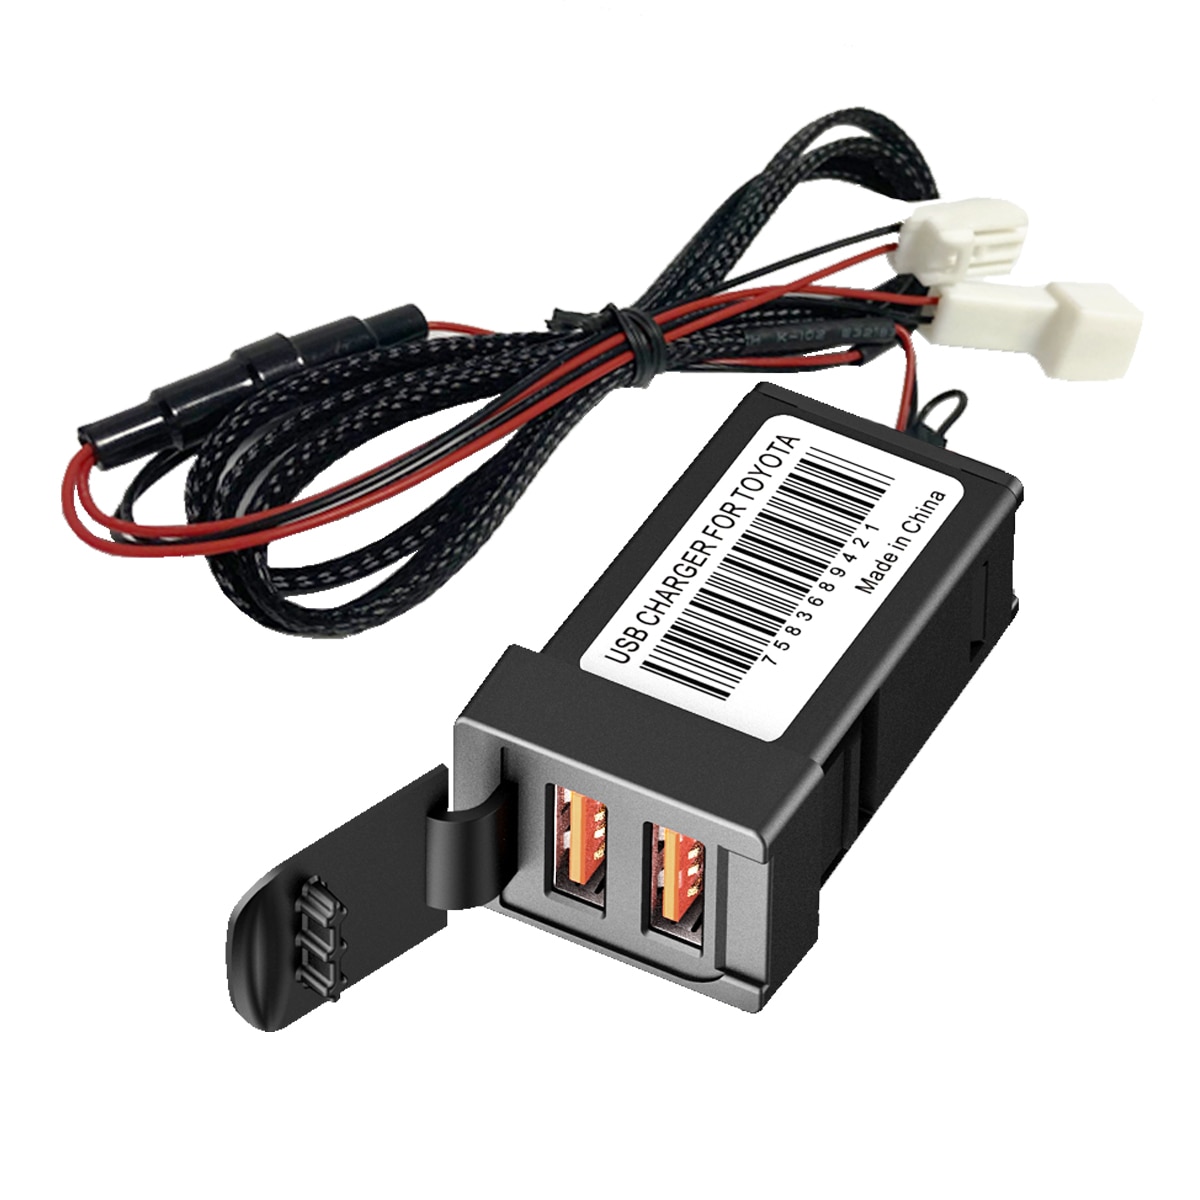 Chelink Fast Charger Adapter Met Cover 9-12V 1.5A Usb Out Zet Voltage Dual Usb-poort Auto-oplader adapter Voor Toyota